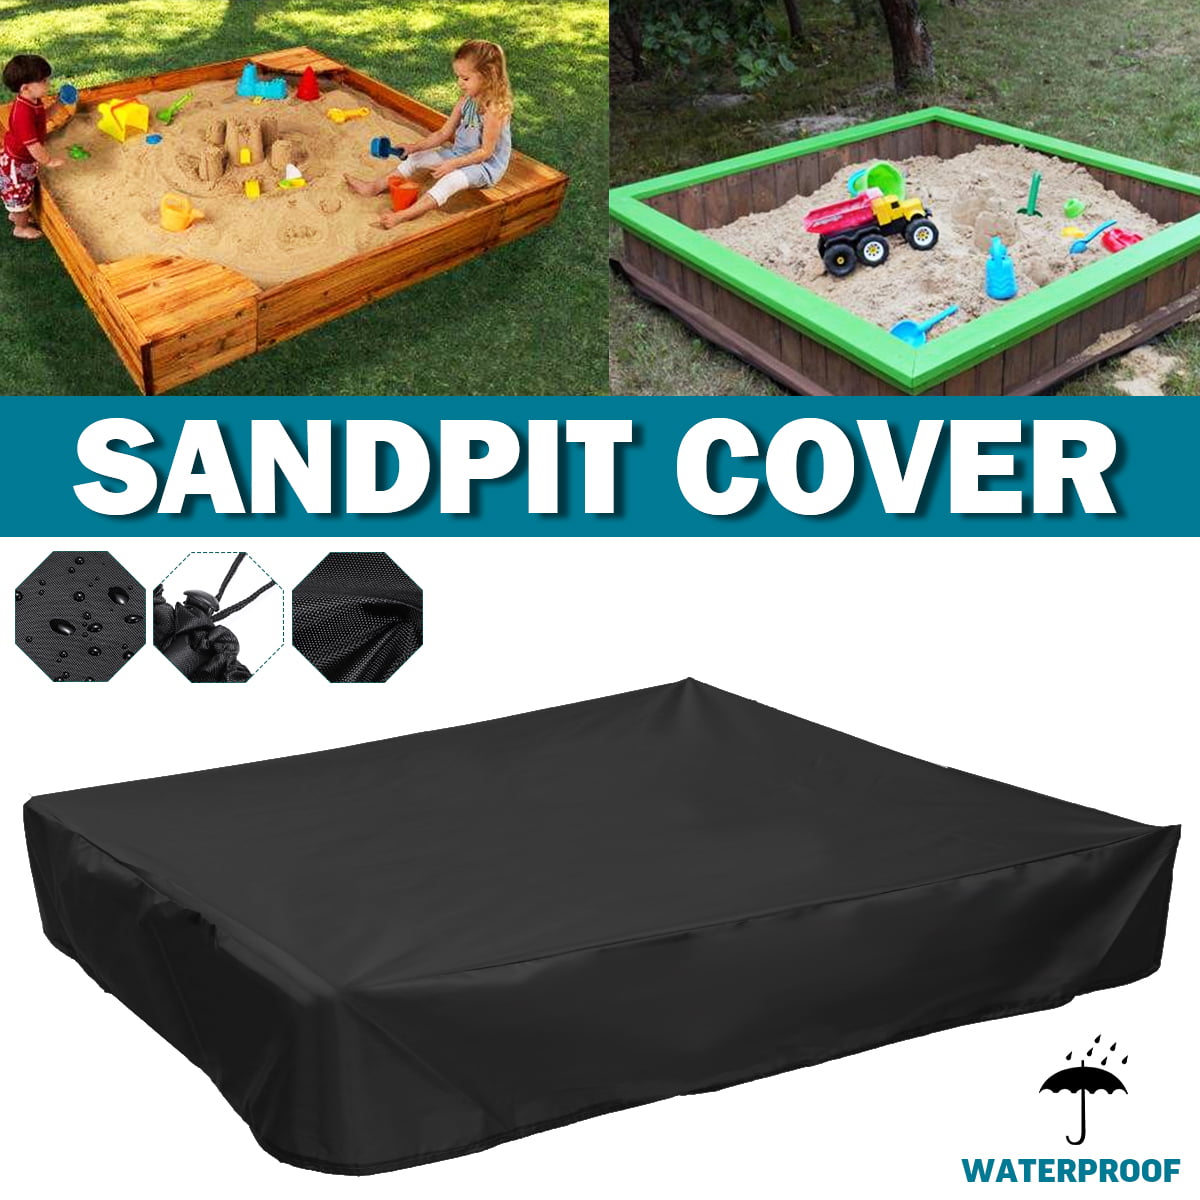 Oxford Cloth Waterproof Canopy Shelter for Sandbox to Avoid The Sand and Toys Contamination Square Sandpit Pool Cover with Drawstring KOET Sandbox Cover 